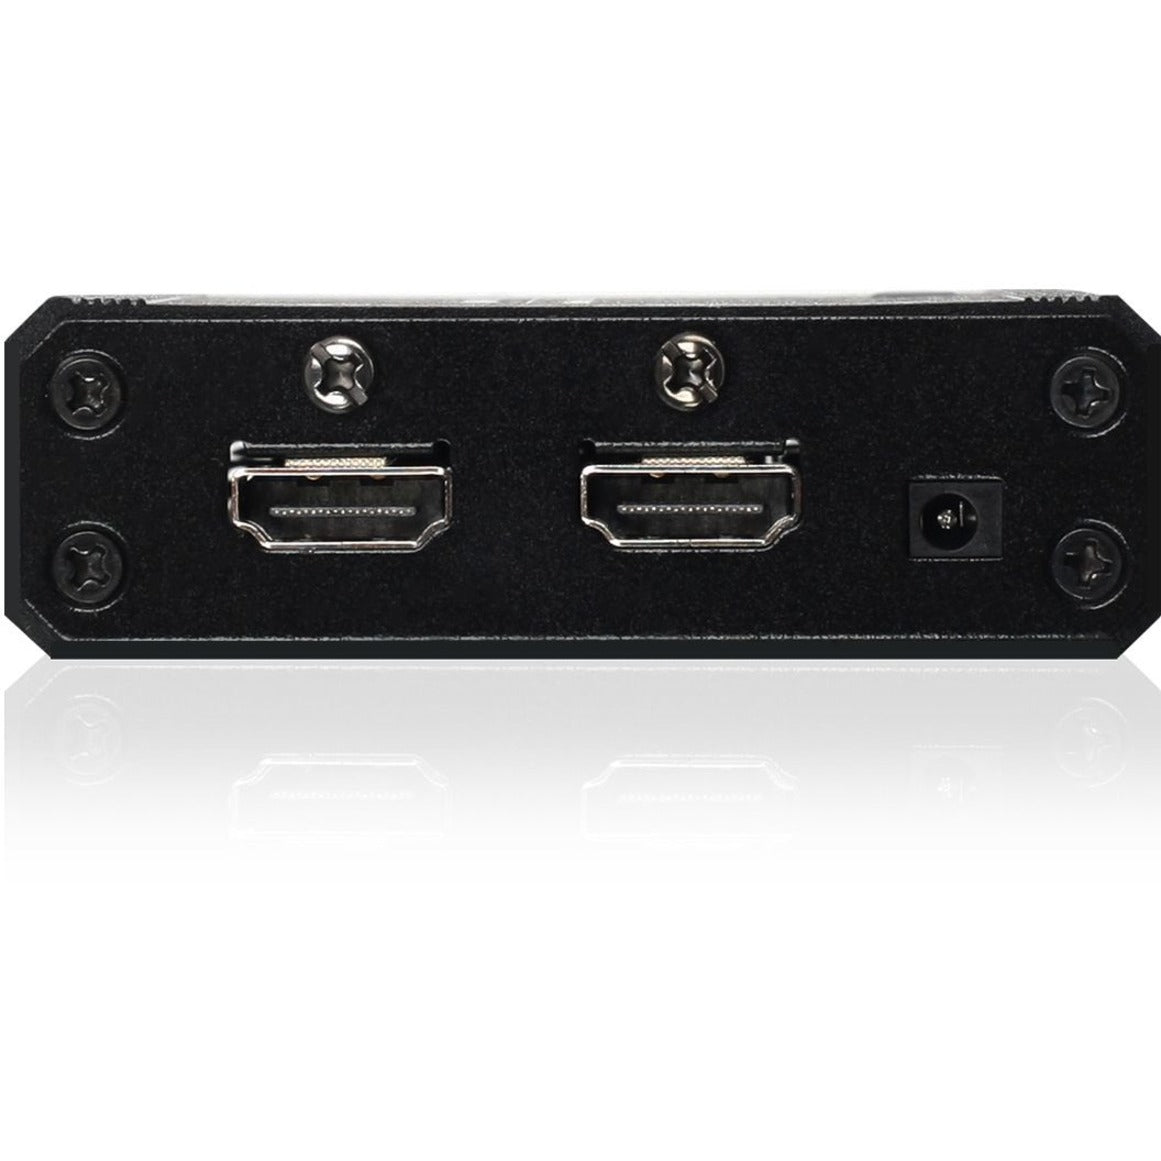 IOGEAR GHSW8431 3-Port True 4K Switch with HDMI Connection, Easy HDMI Switching for High-Quality Video